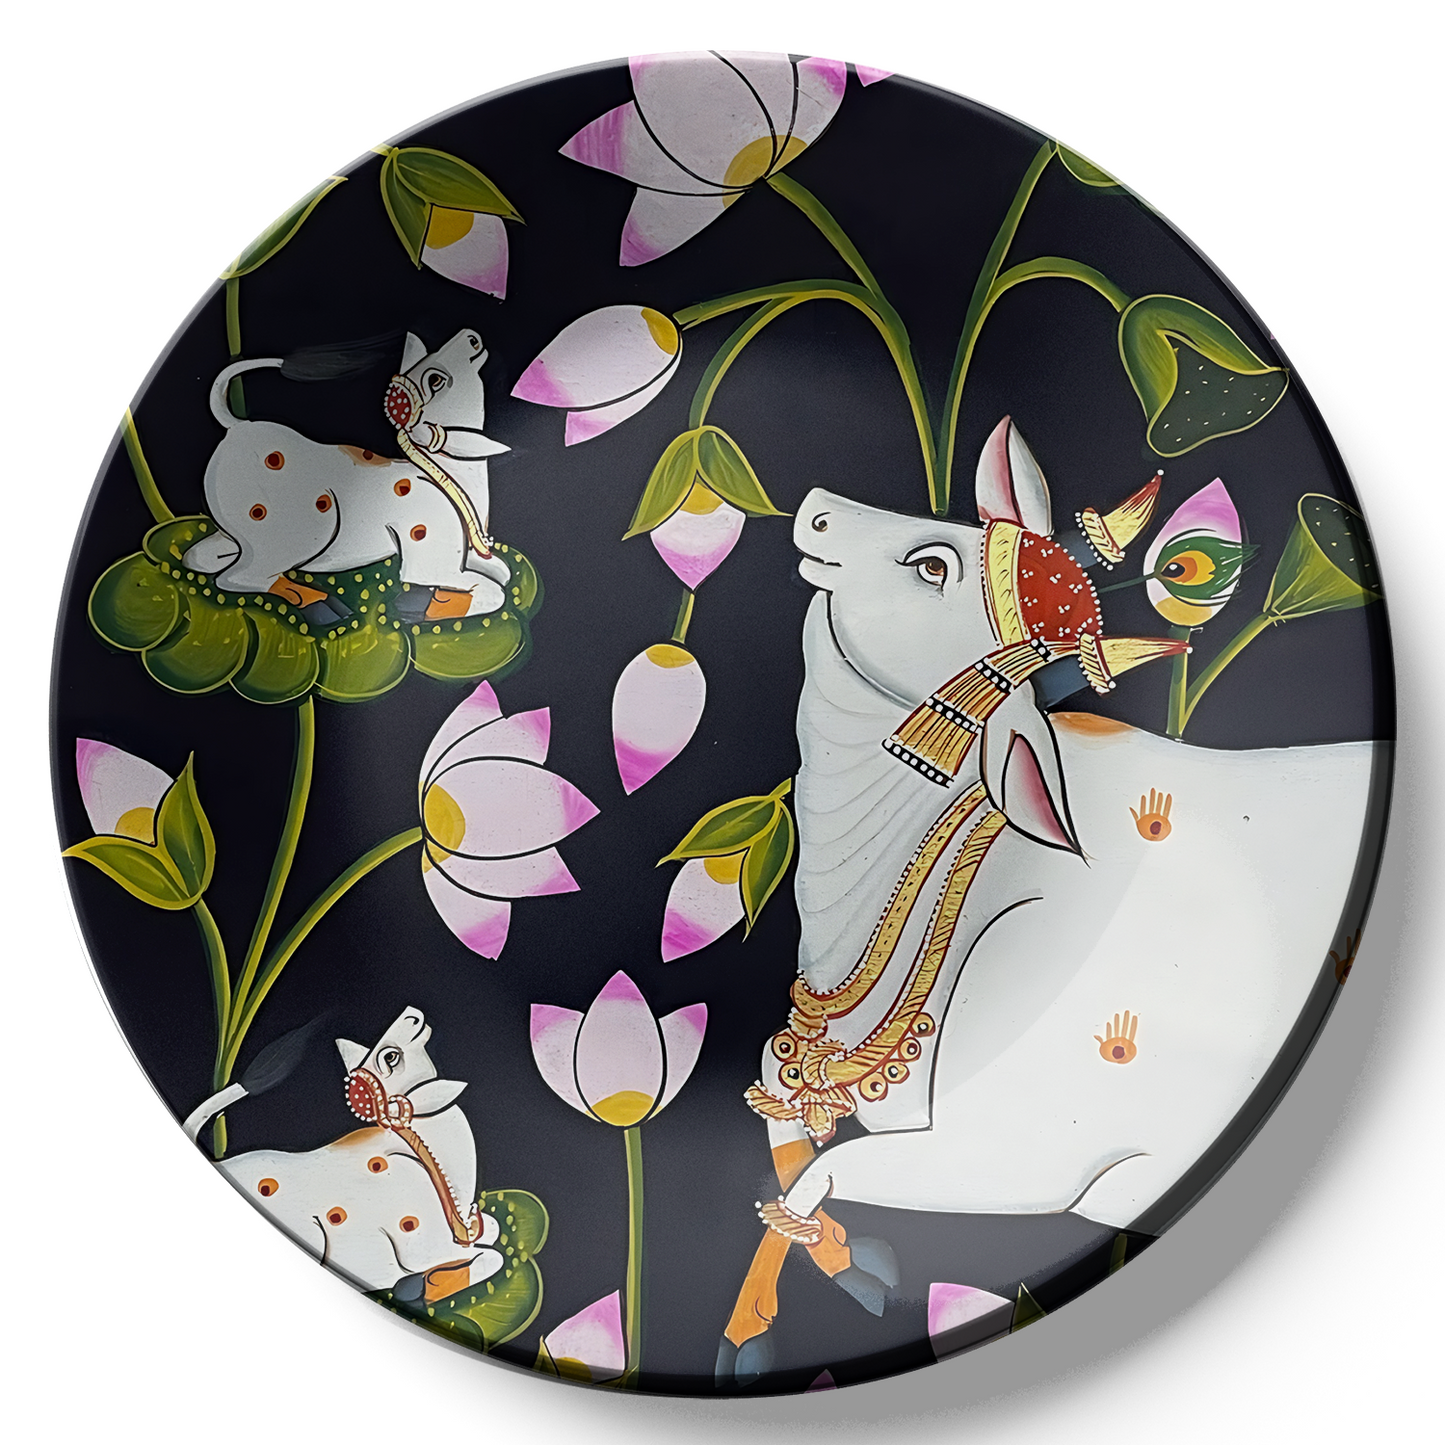 Pichwai Sacred Cows and Pink Lotus Ceramic Wall Plate Home Décor